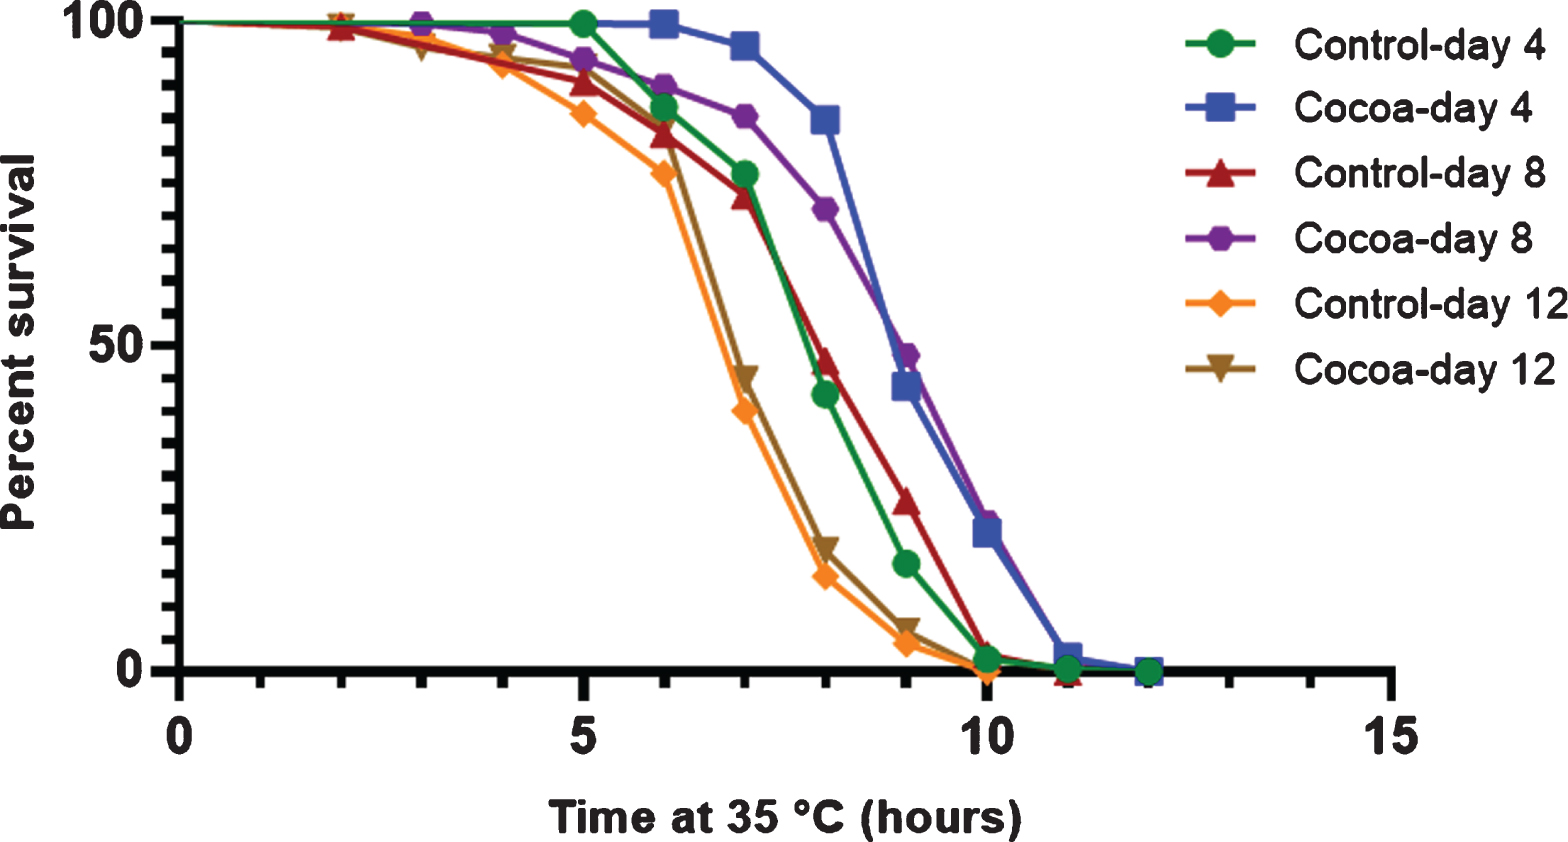 Survival curves at 35 °C for control and cocoa-supplemented wild type (N2) C. elegans at day 4, day 8 and day 12. Experiments were performed in triplicate [n = 204 (day 4); n = 224 (day 8); n = 252 (day 12) for control and n = 178 (day 4); n = 218 (day 8); n = 194 (day 12) for cocoa]. Differences between survival curves were calculated using log rank (Mantel-Cox) test. Both mean and median survival times of control worms were significantly reduced at day 12 compared to both day 4 and day 8 (P < 0.05). Cocoa supplementation significantly increased the mean survival time at day 4, day 8 and day 12 (P < 0.05, 15.0%, 11.1%and 3.3%respectively). Cocoa supplementation significantly increased the median survival time at both day 4 and day 8 (P < 0.05, 12.5%).